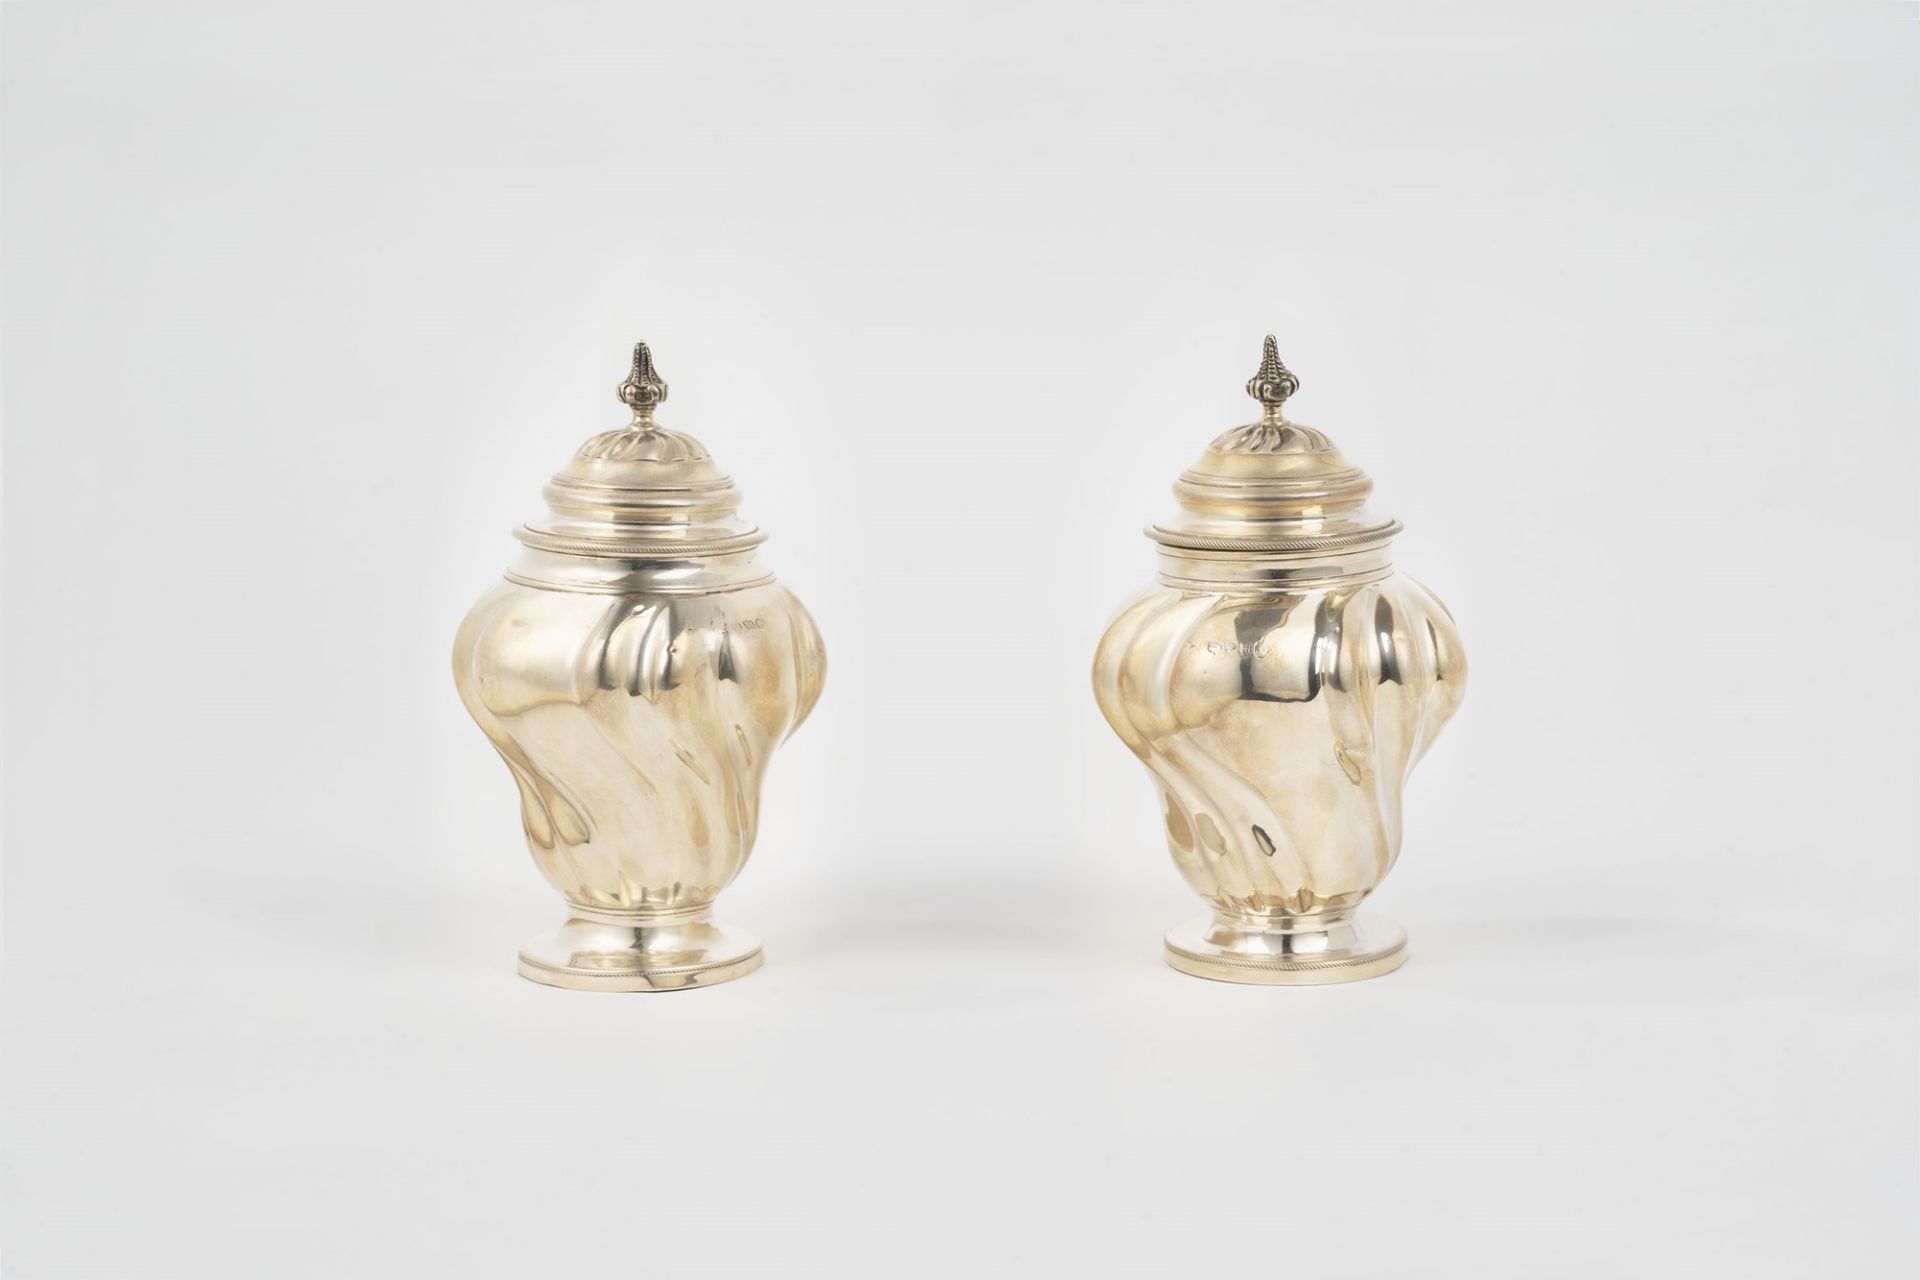 Two silver vases, London, 19th century